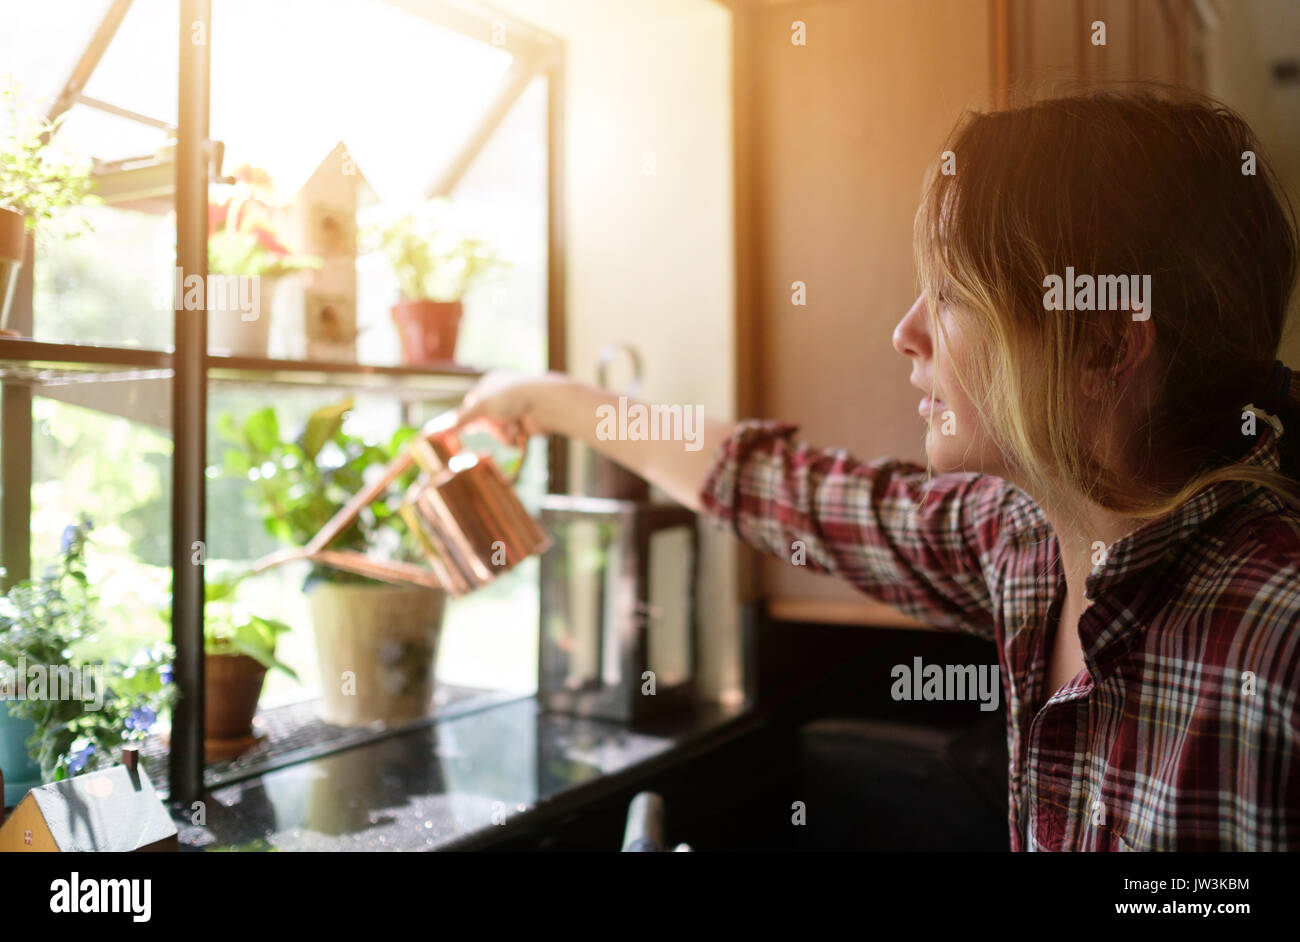 Woman watering plants at home Banque D'Images